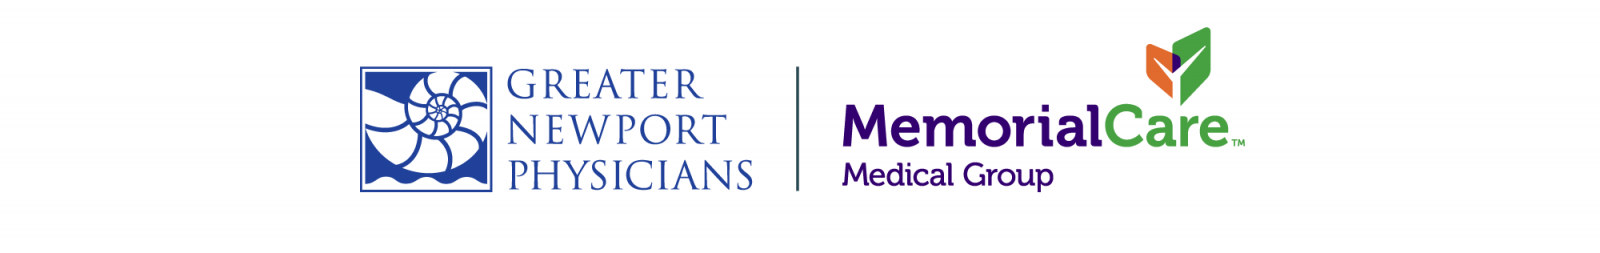 Greater Newport Physicans | MemorialCare Medical Group